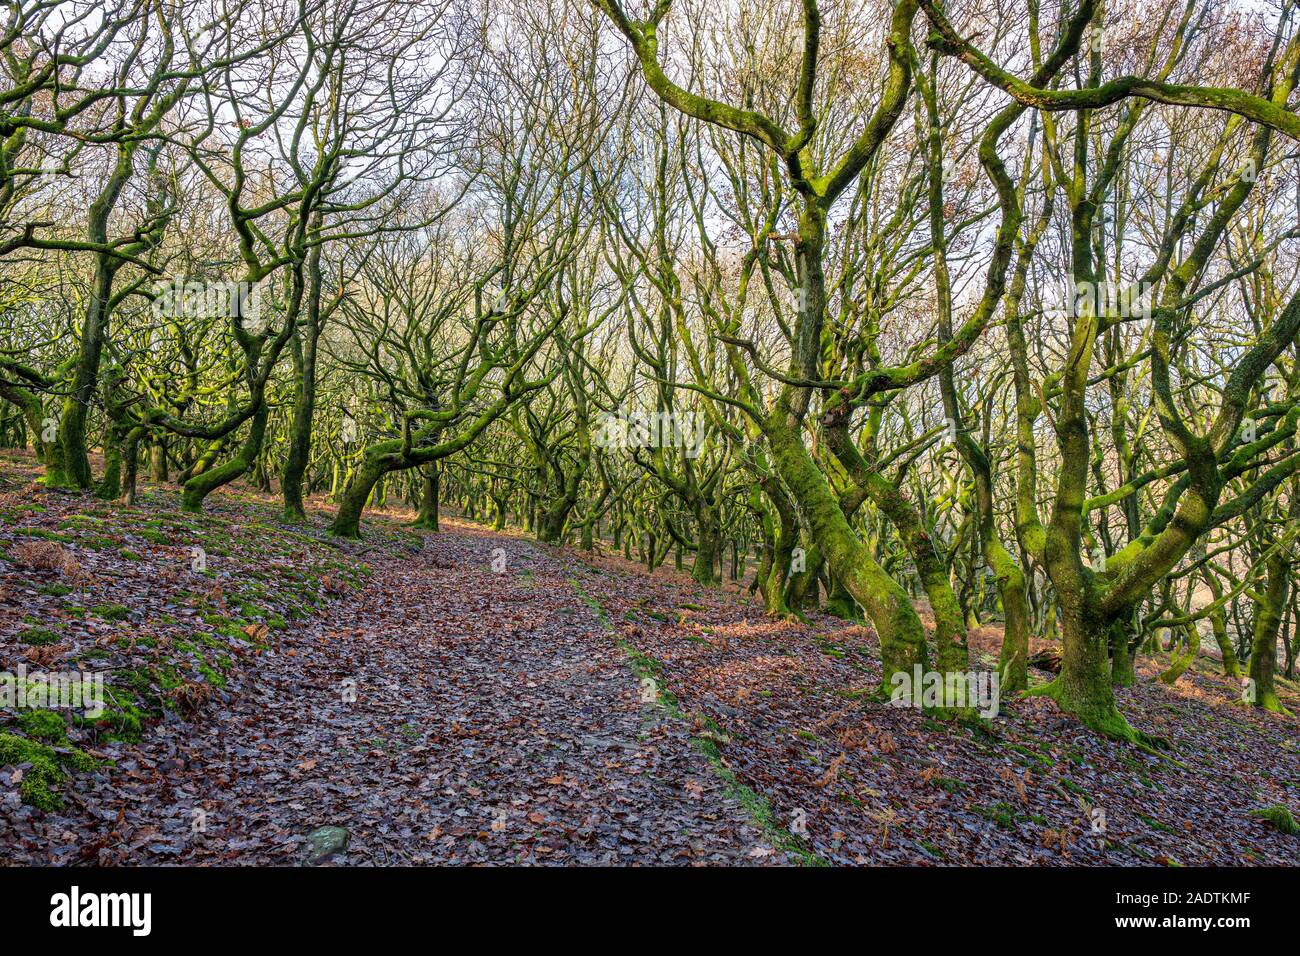 Twisted trees growing on a hillside in Wales. Stock Photo